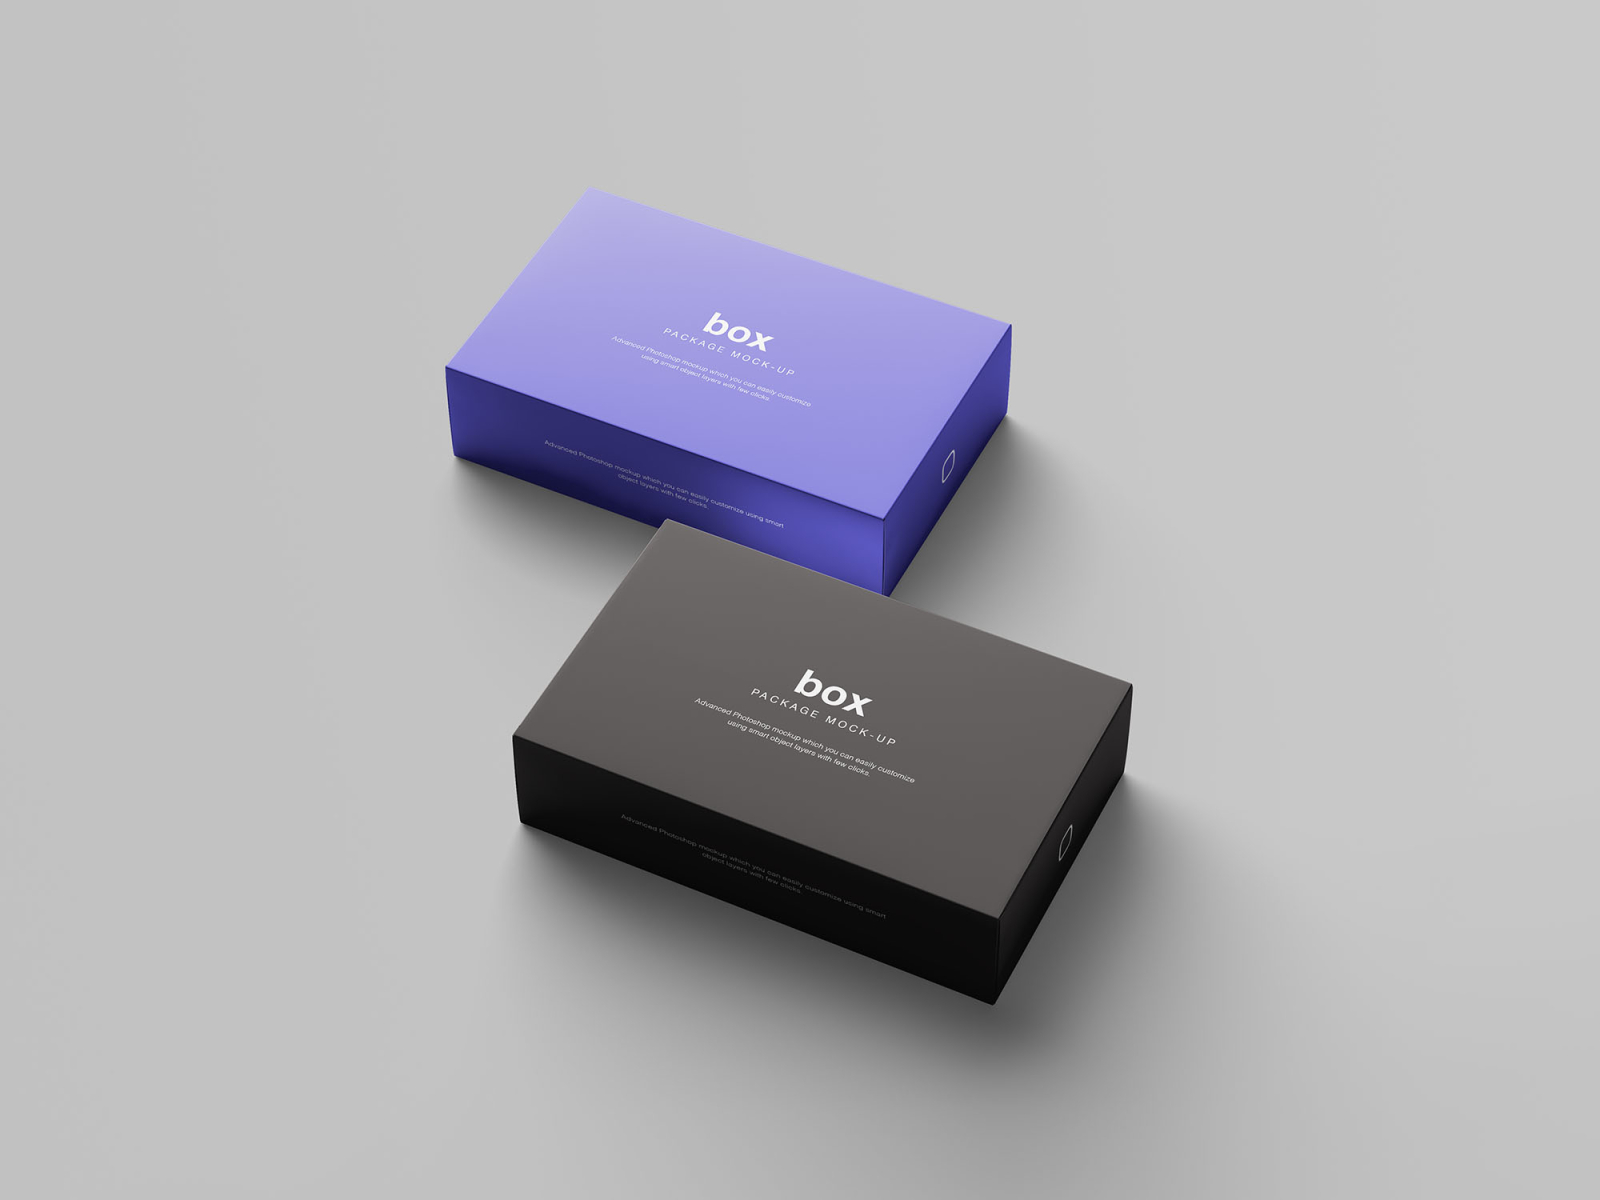 Download Box Packaging Mockup by Graphic Pear on Dribbble